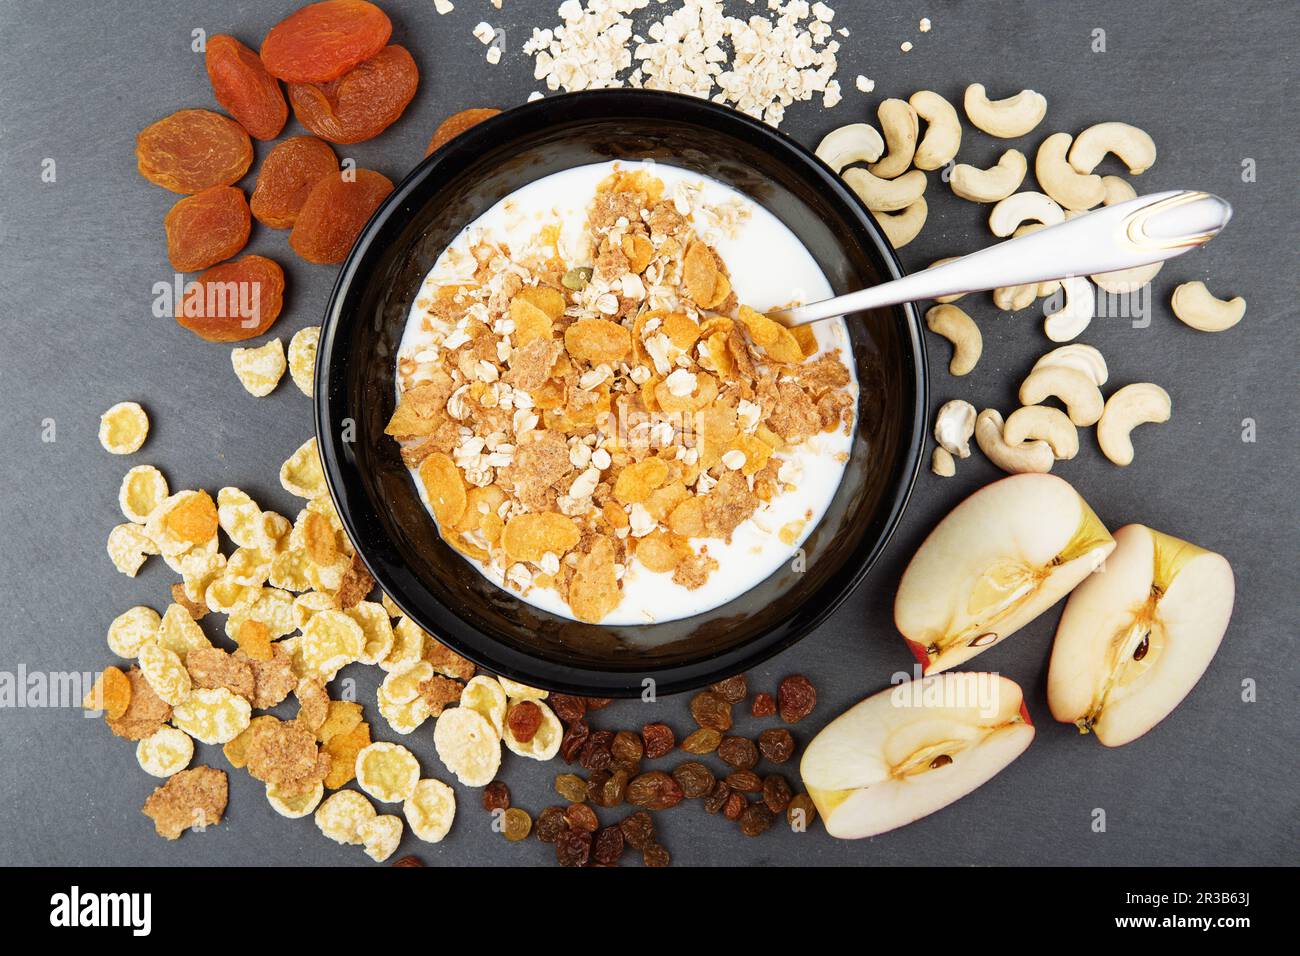 Muesli, nuts, fruits, milk and oatmeal for breakfast. Plate of oat flakes, cashew, apples and seeds Stock Photo